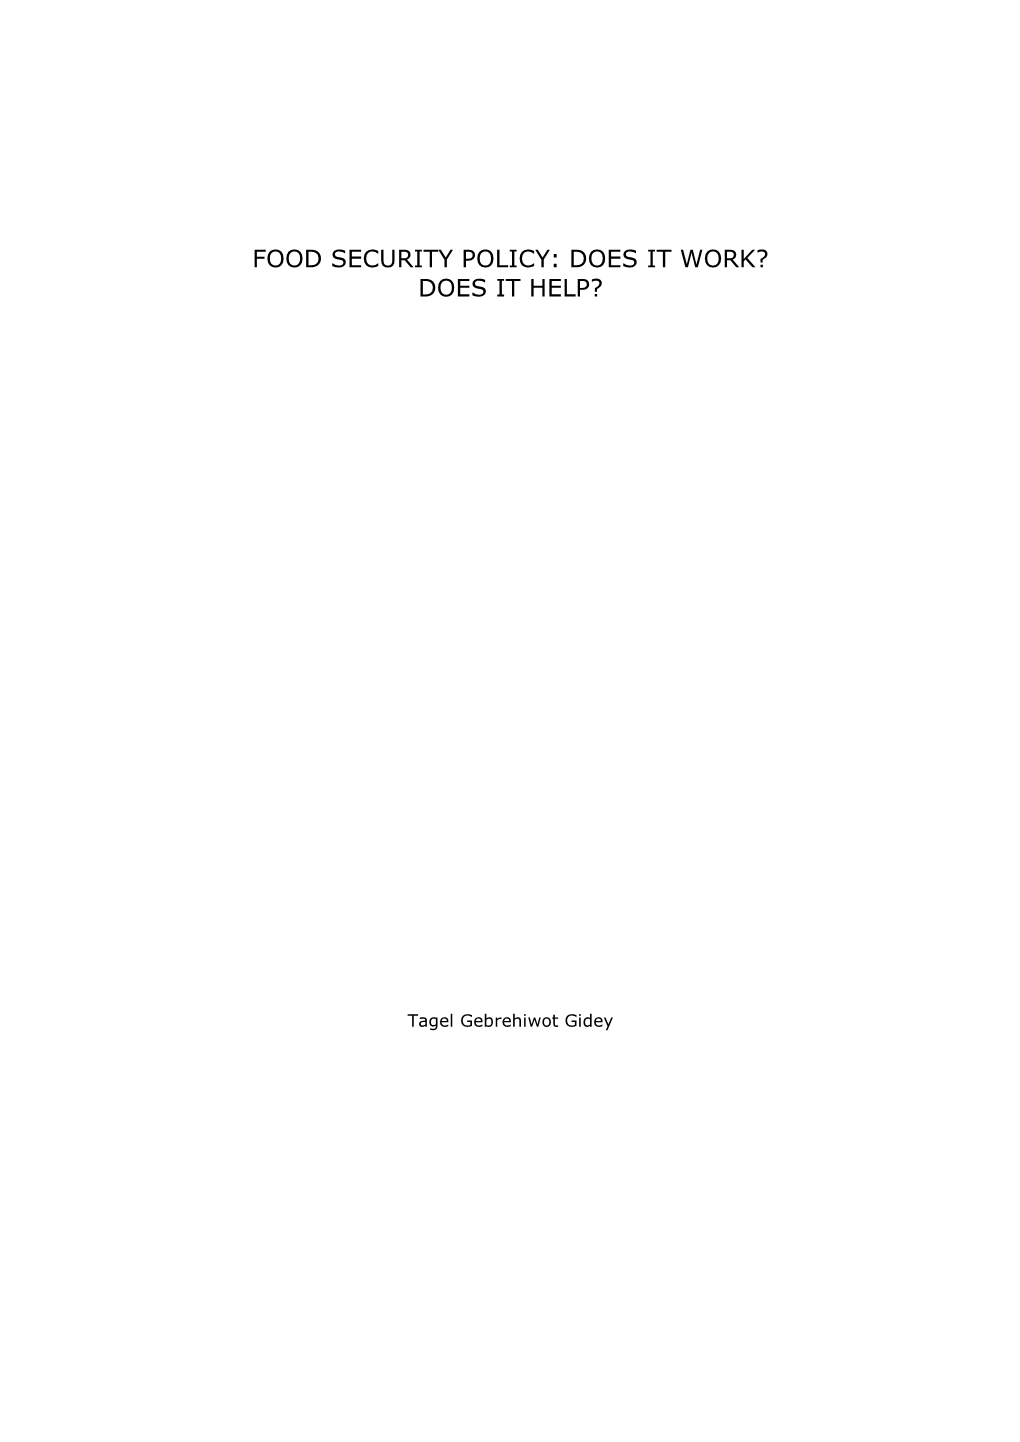 Food Security Policy: Does It Work? Does It Help?